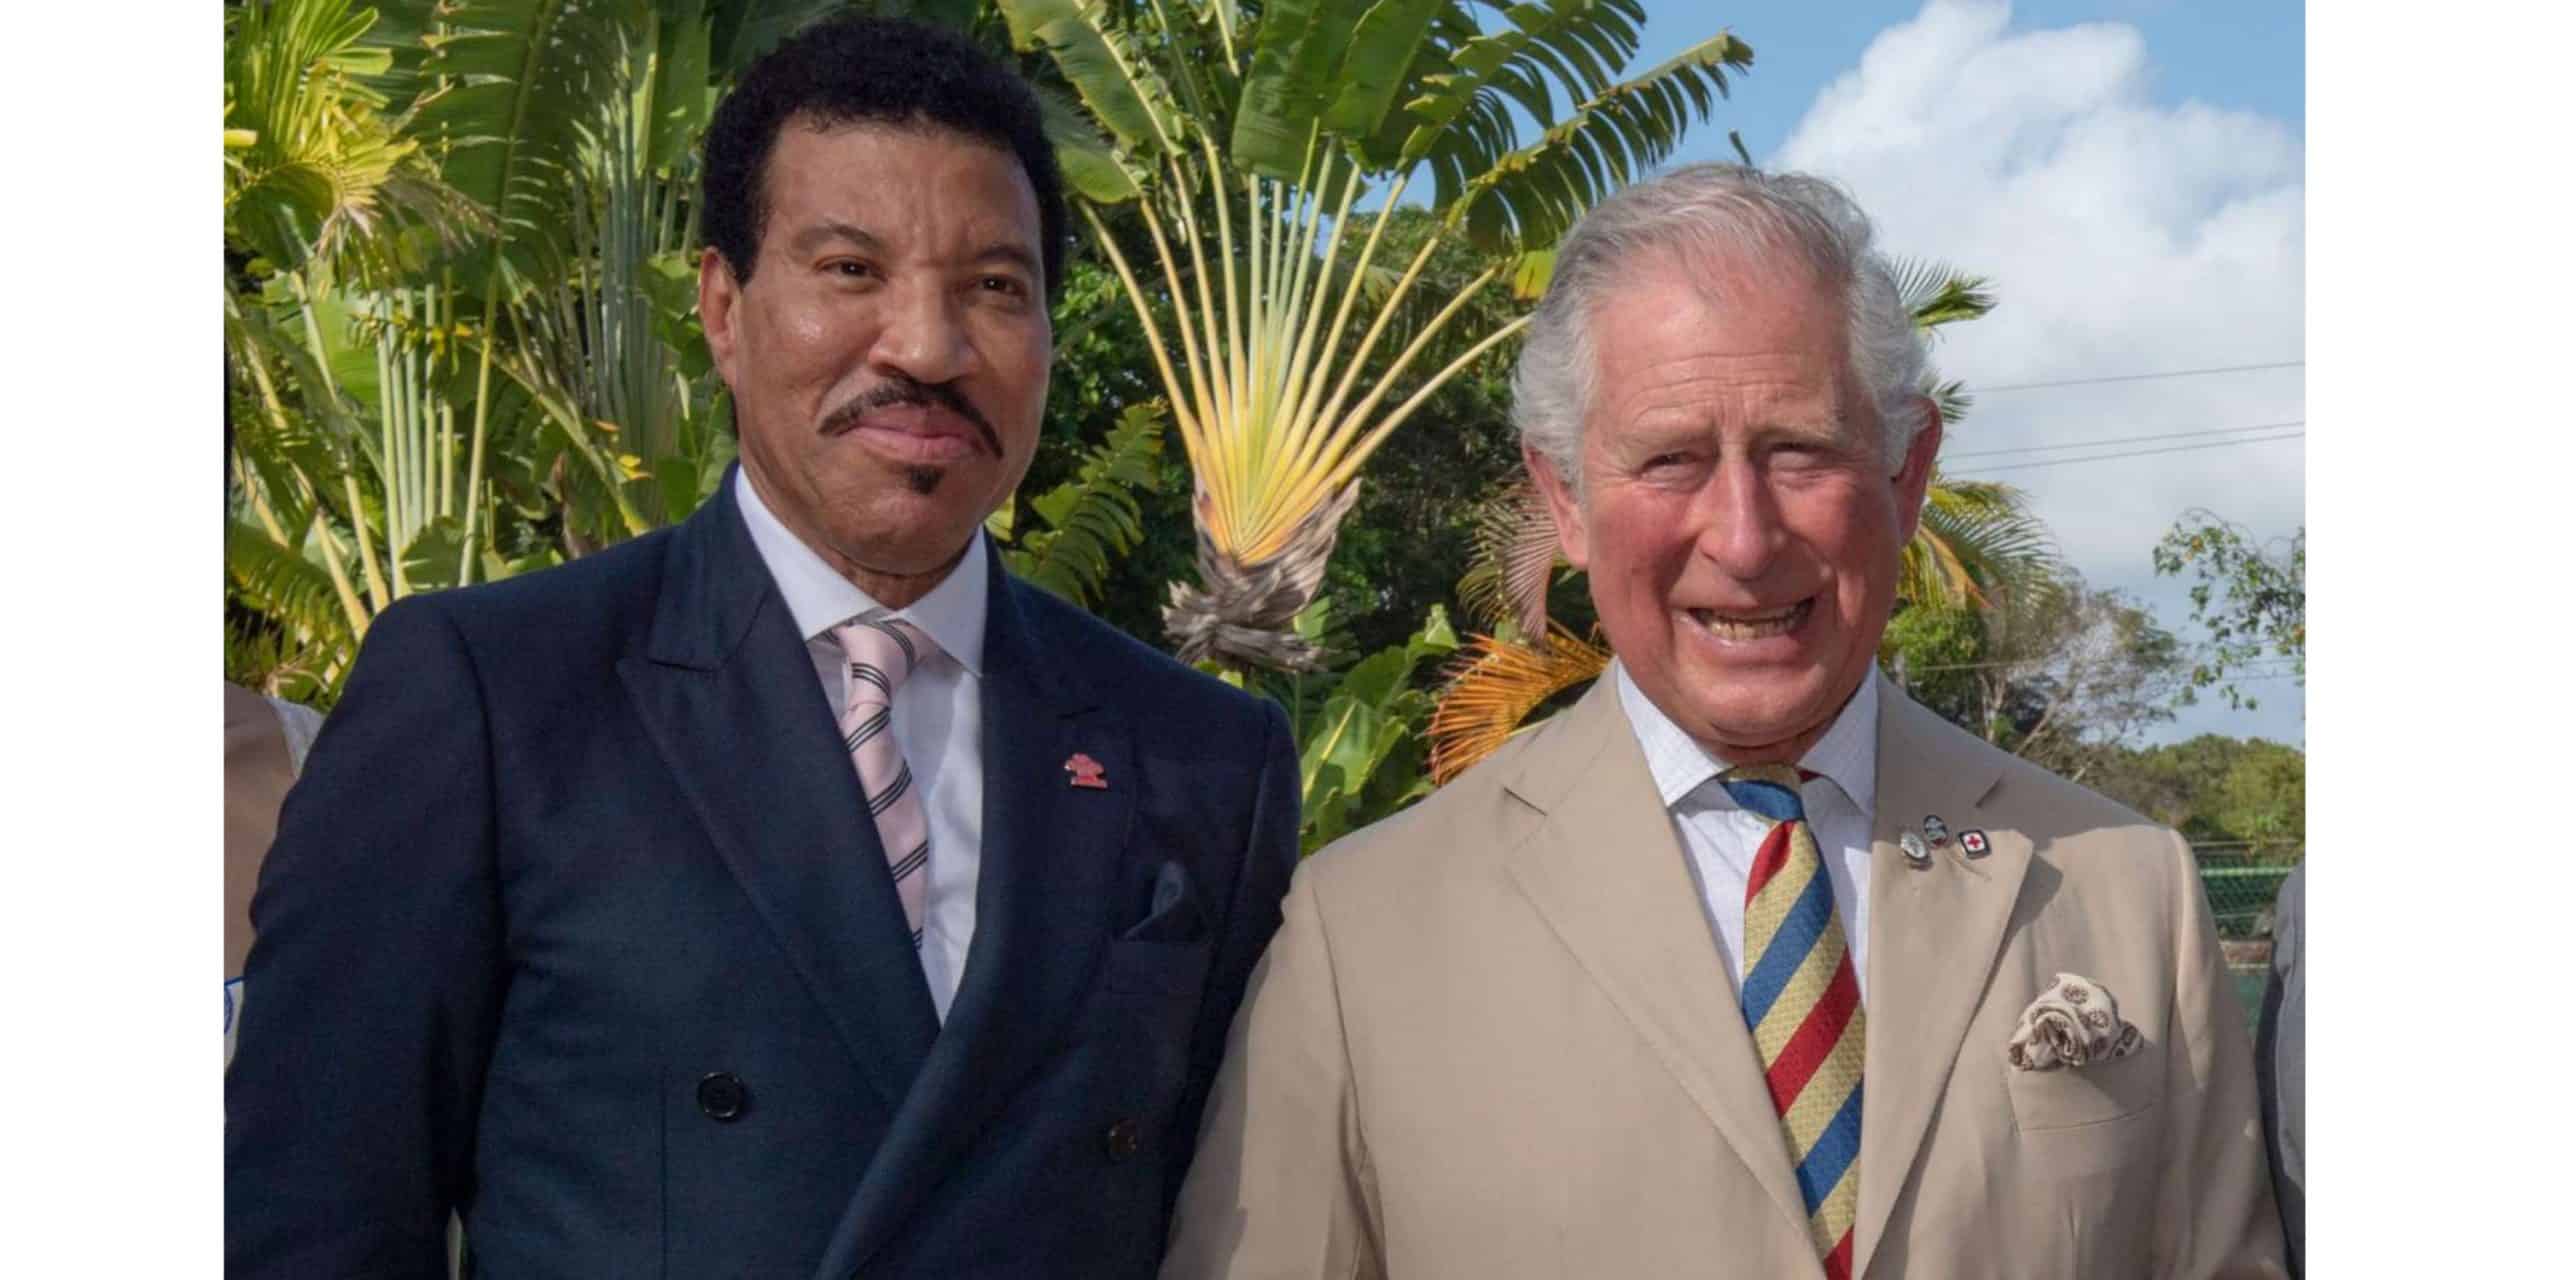 Lionel Richie & King Charles III at the coronation garden party